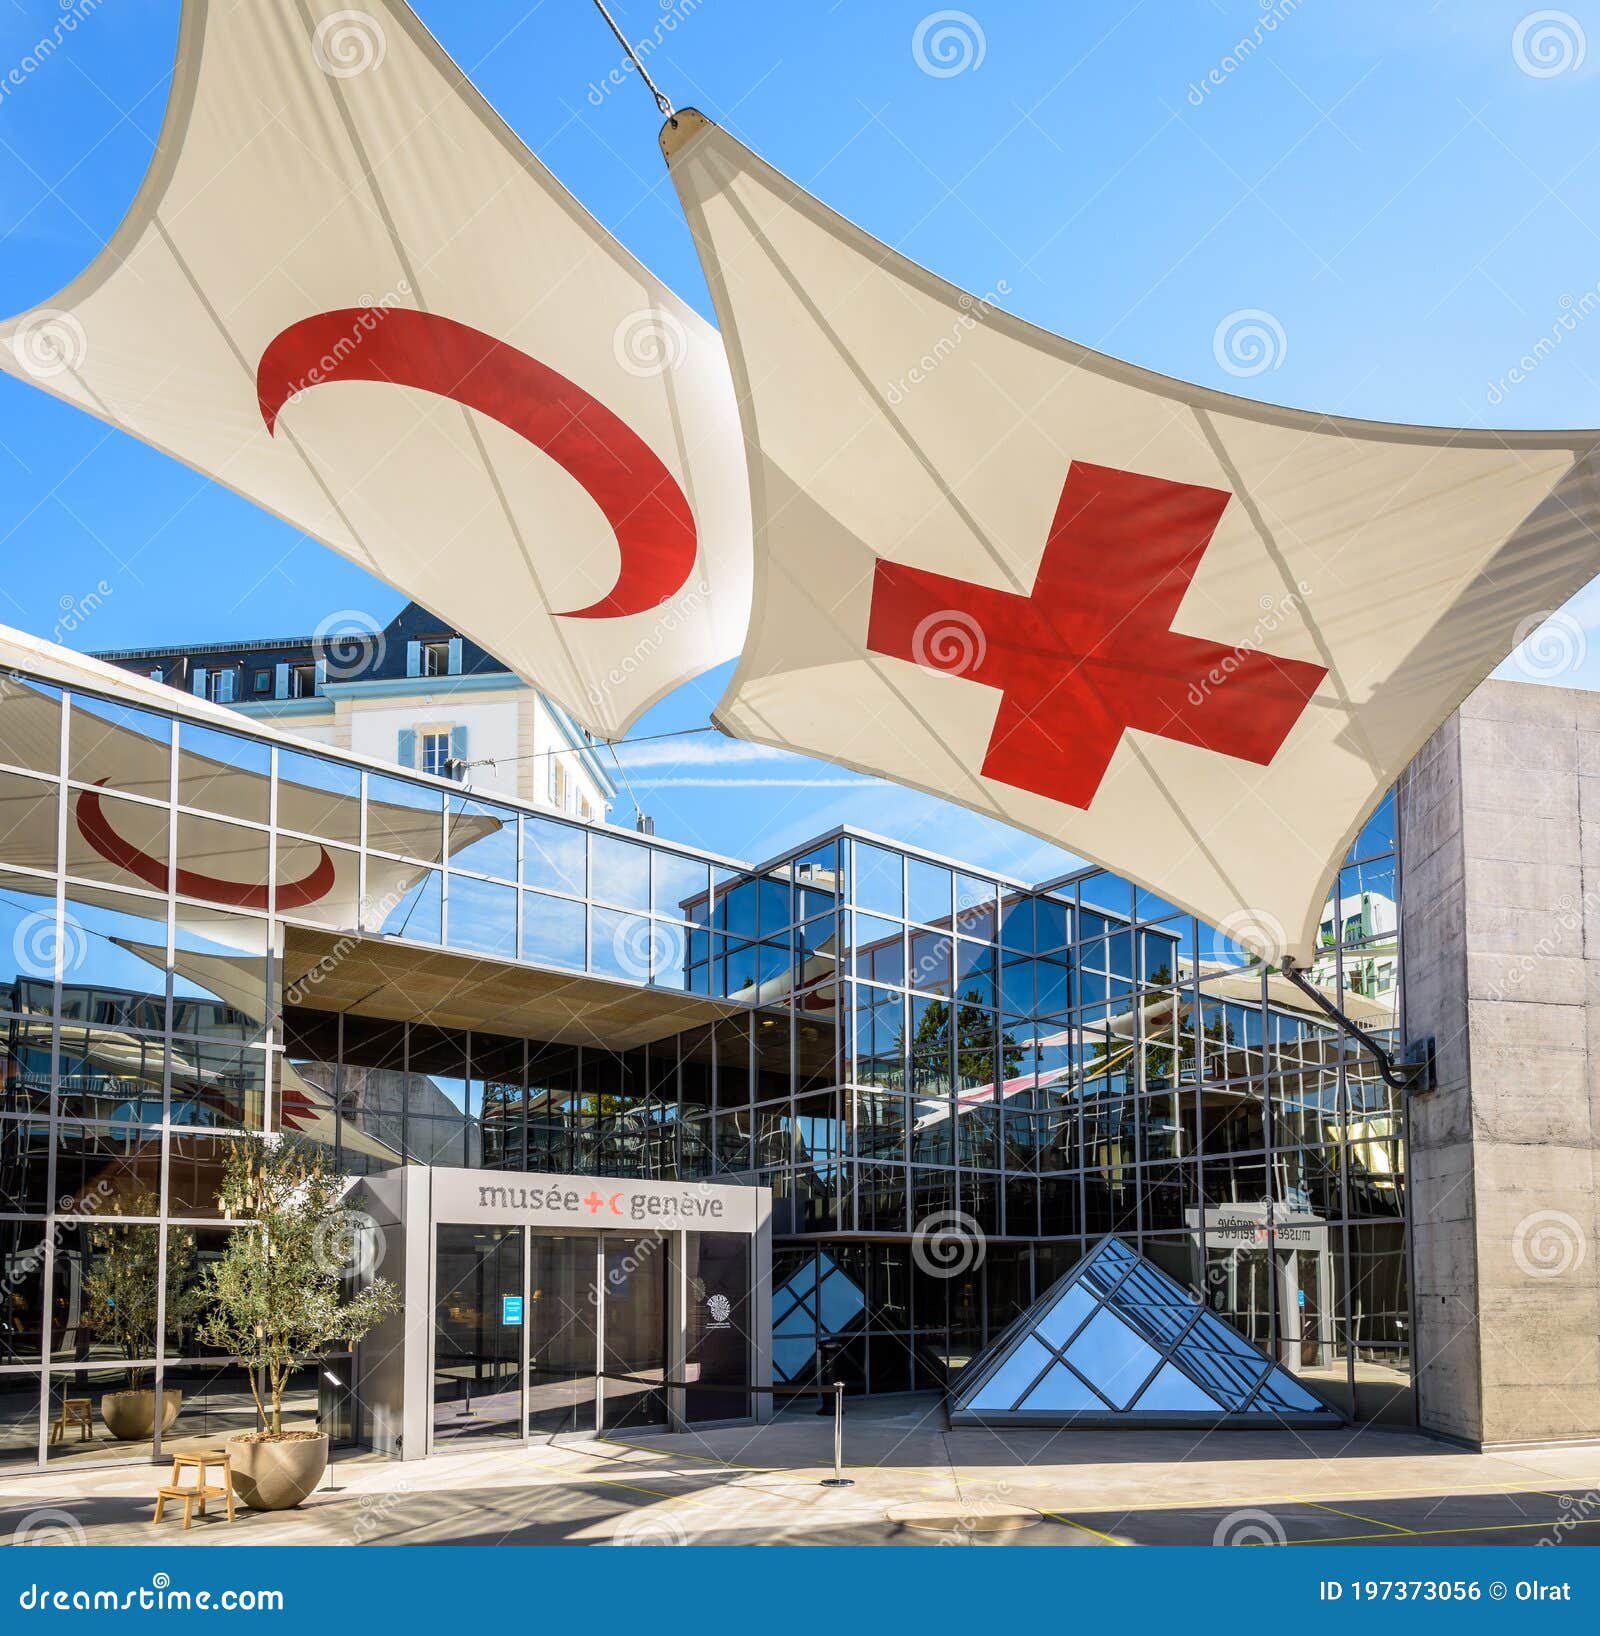 of the International Red Cross and Red Crescent Museum in Geneva, Switzerland Editorial Photo - Image of nongovernmental, humanitarian: 197373056